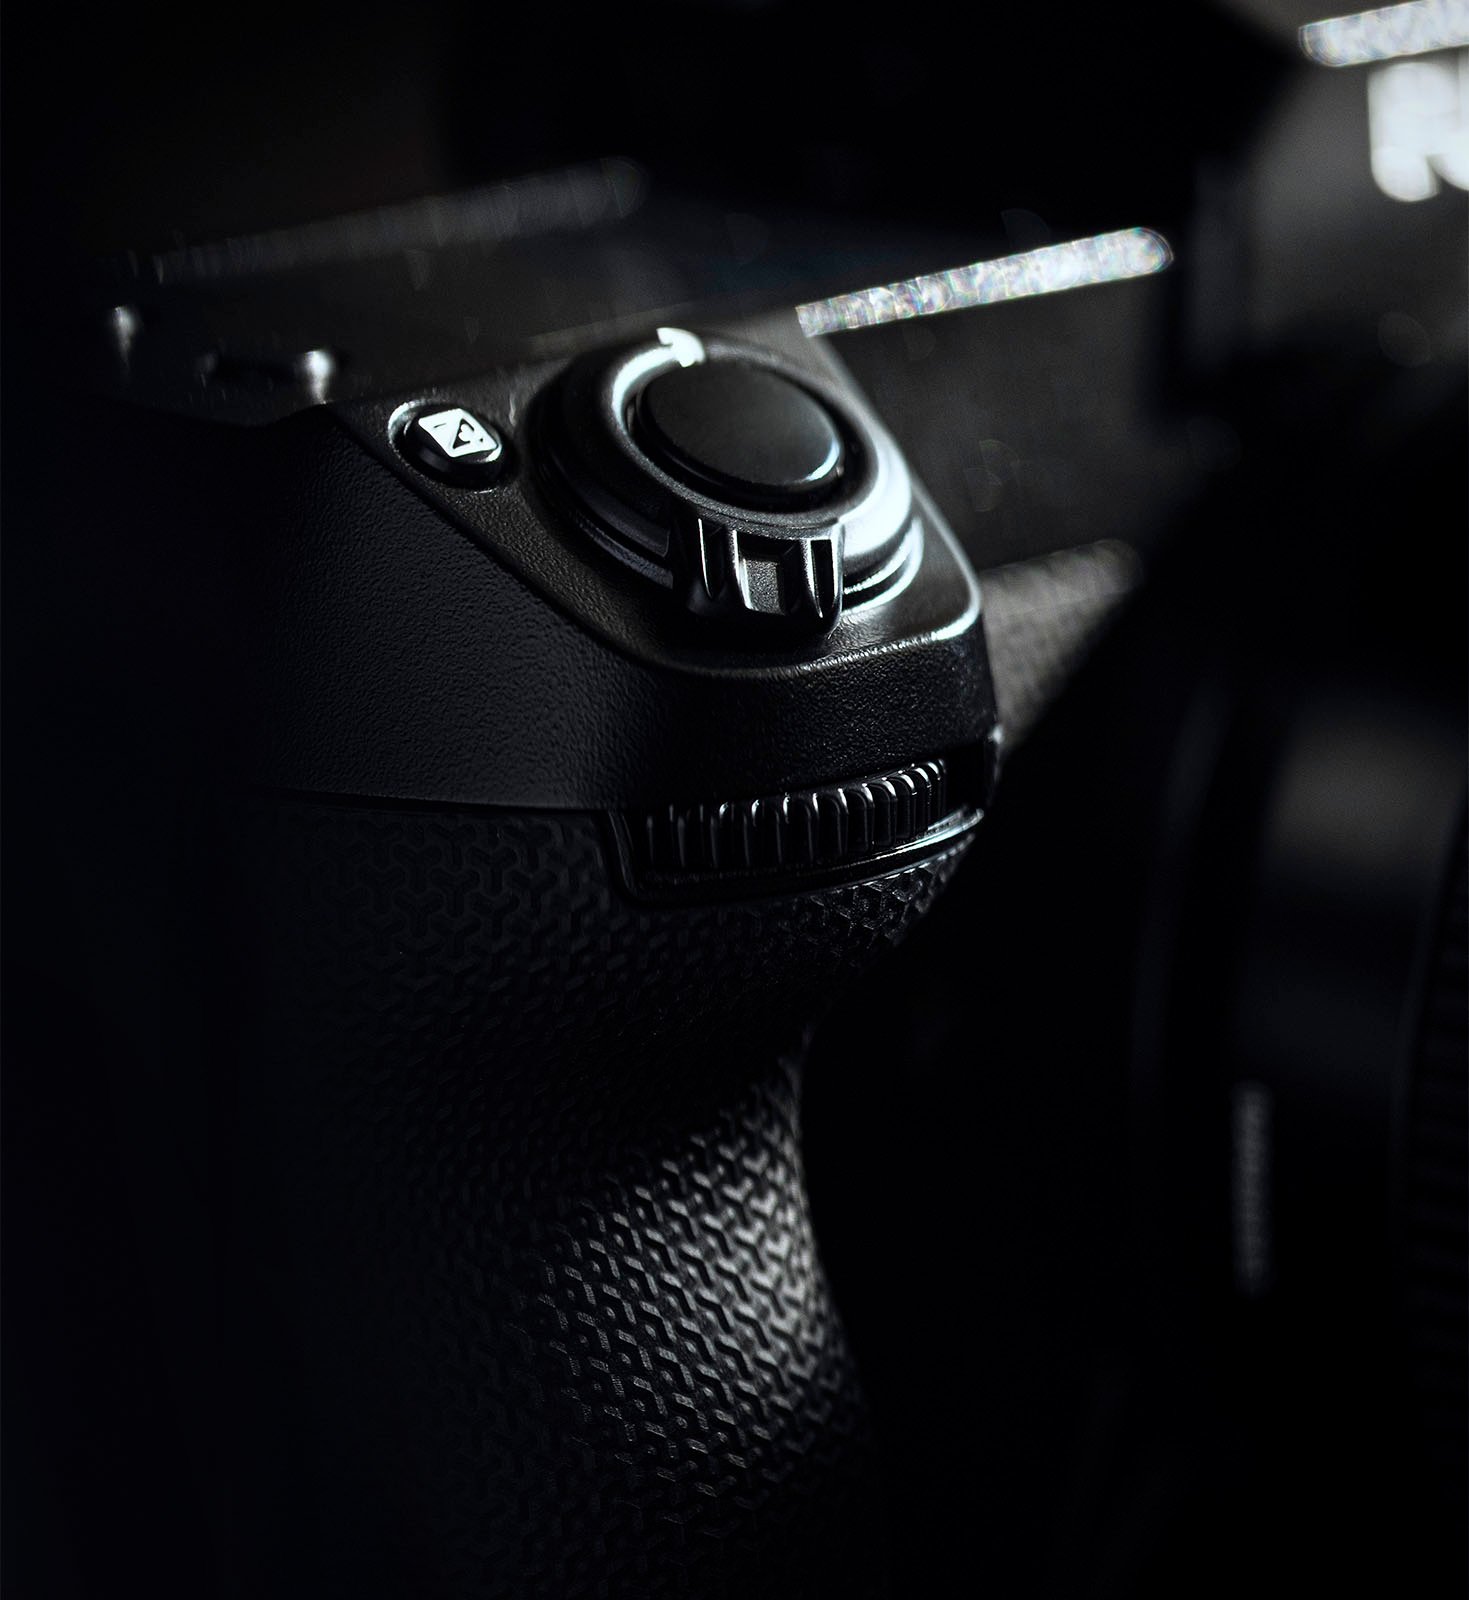 A close-up shot of a black camera's control dial and textured grip on a dark background. The image focuses on the intricate details of the dial and the ergonomic design of the grip.